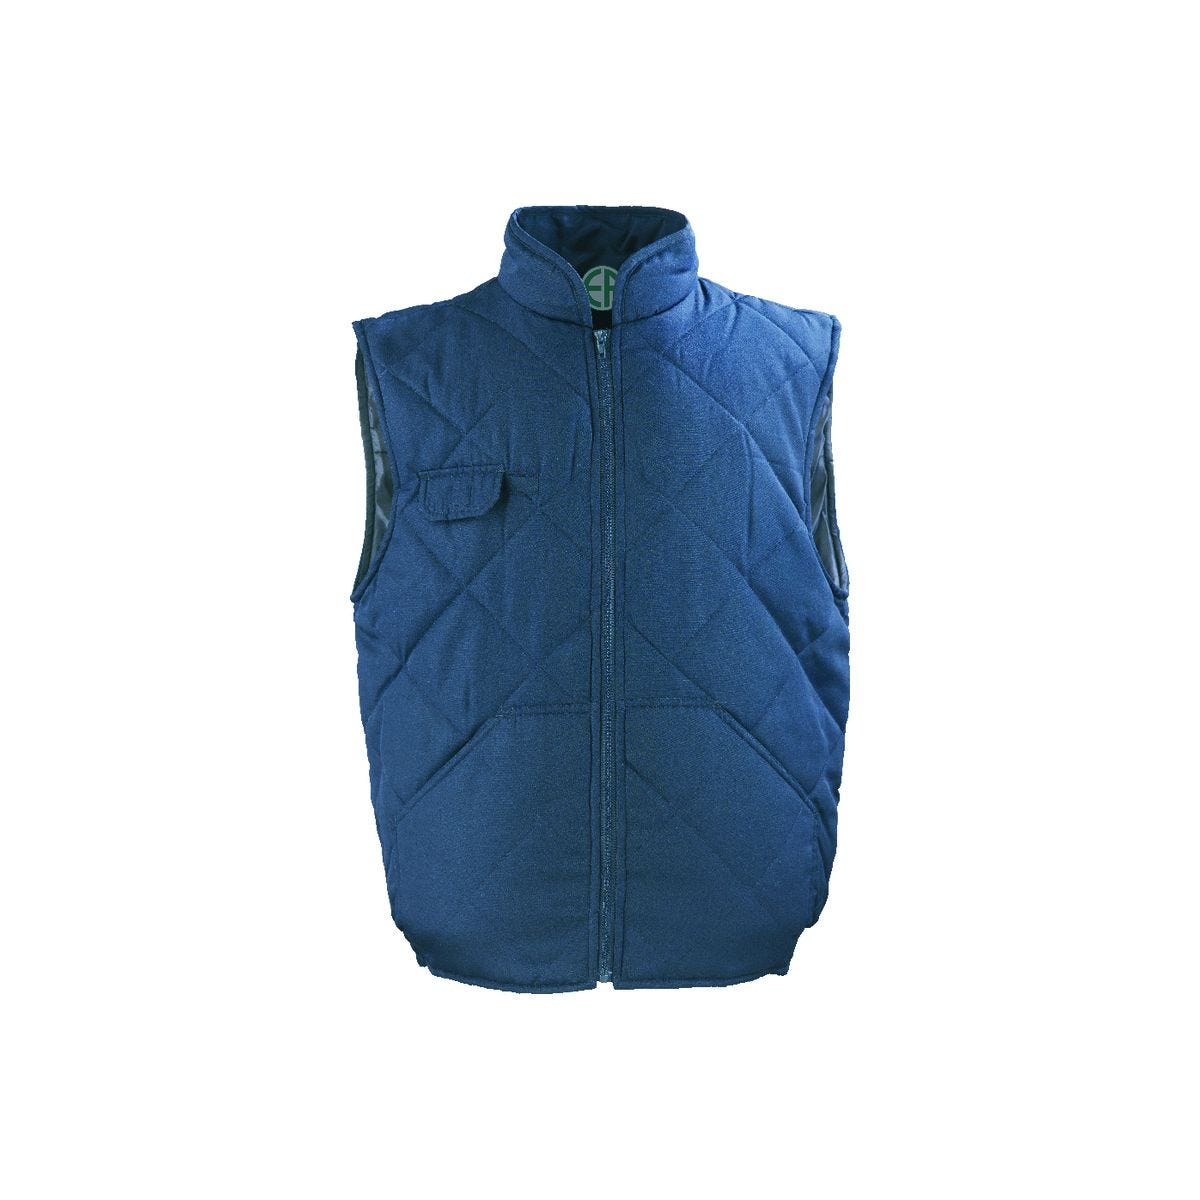 CHOUKA Gilet Froid marine, 65%PES/35%CO + Matelassage 180g/m² - COVERGUARD - Taille L 0